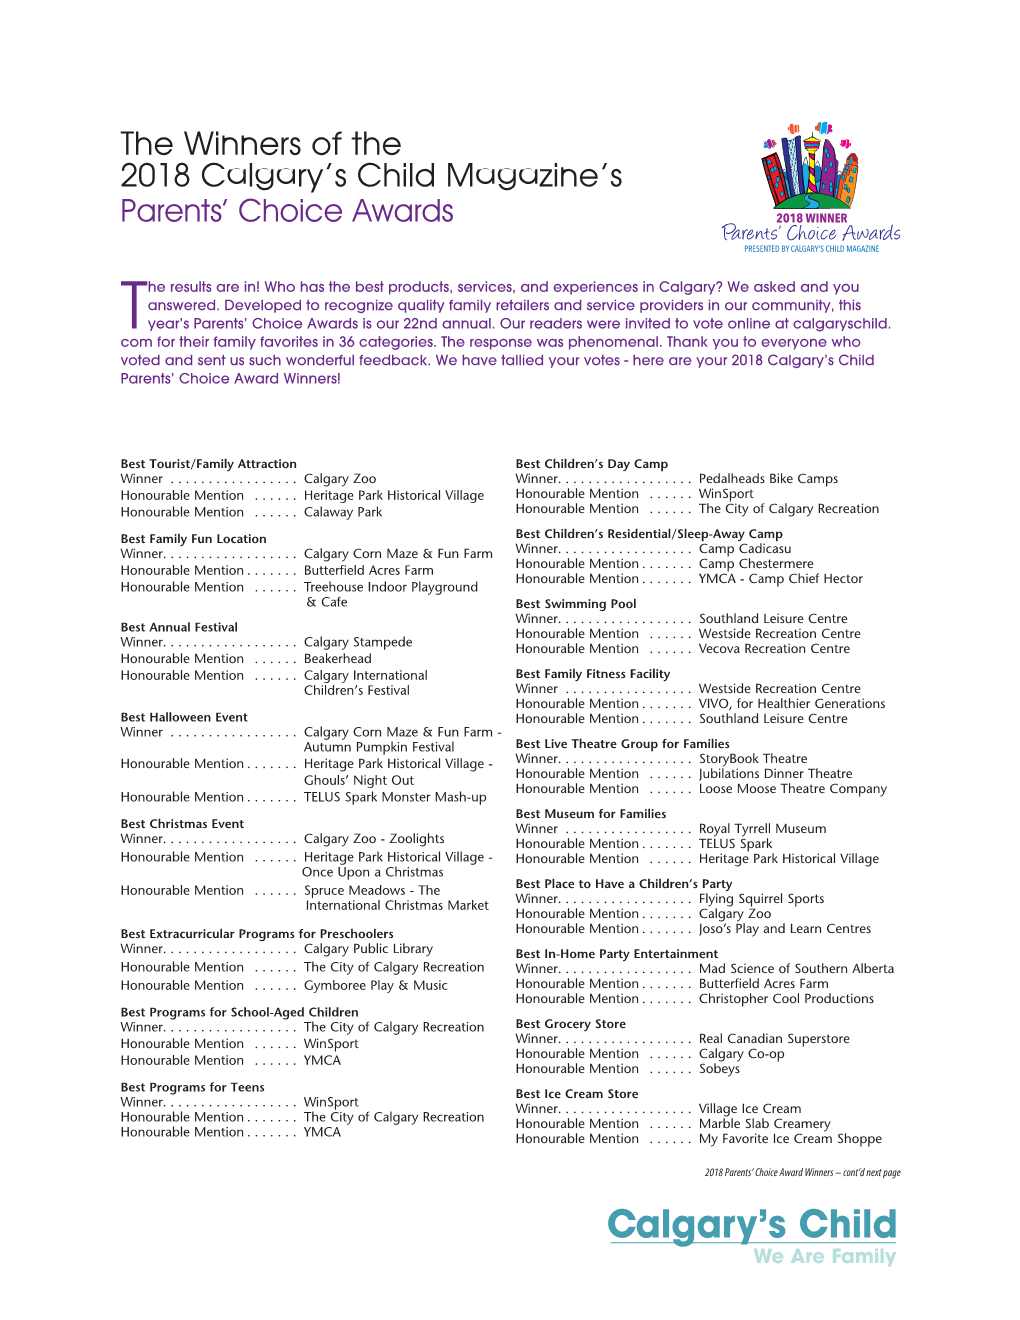 The Winners of the 2018 Calgary's Child Magazine's Parents' Choice